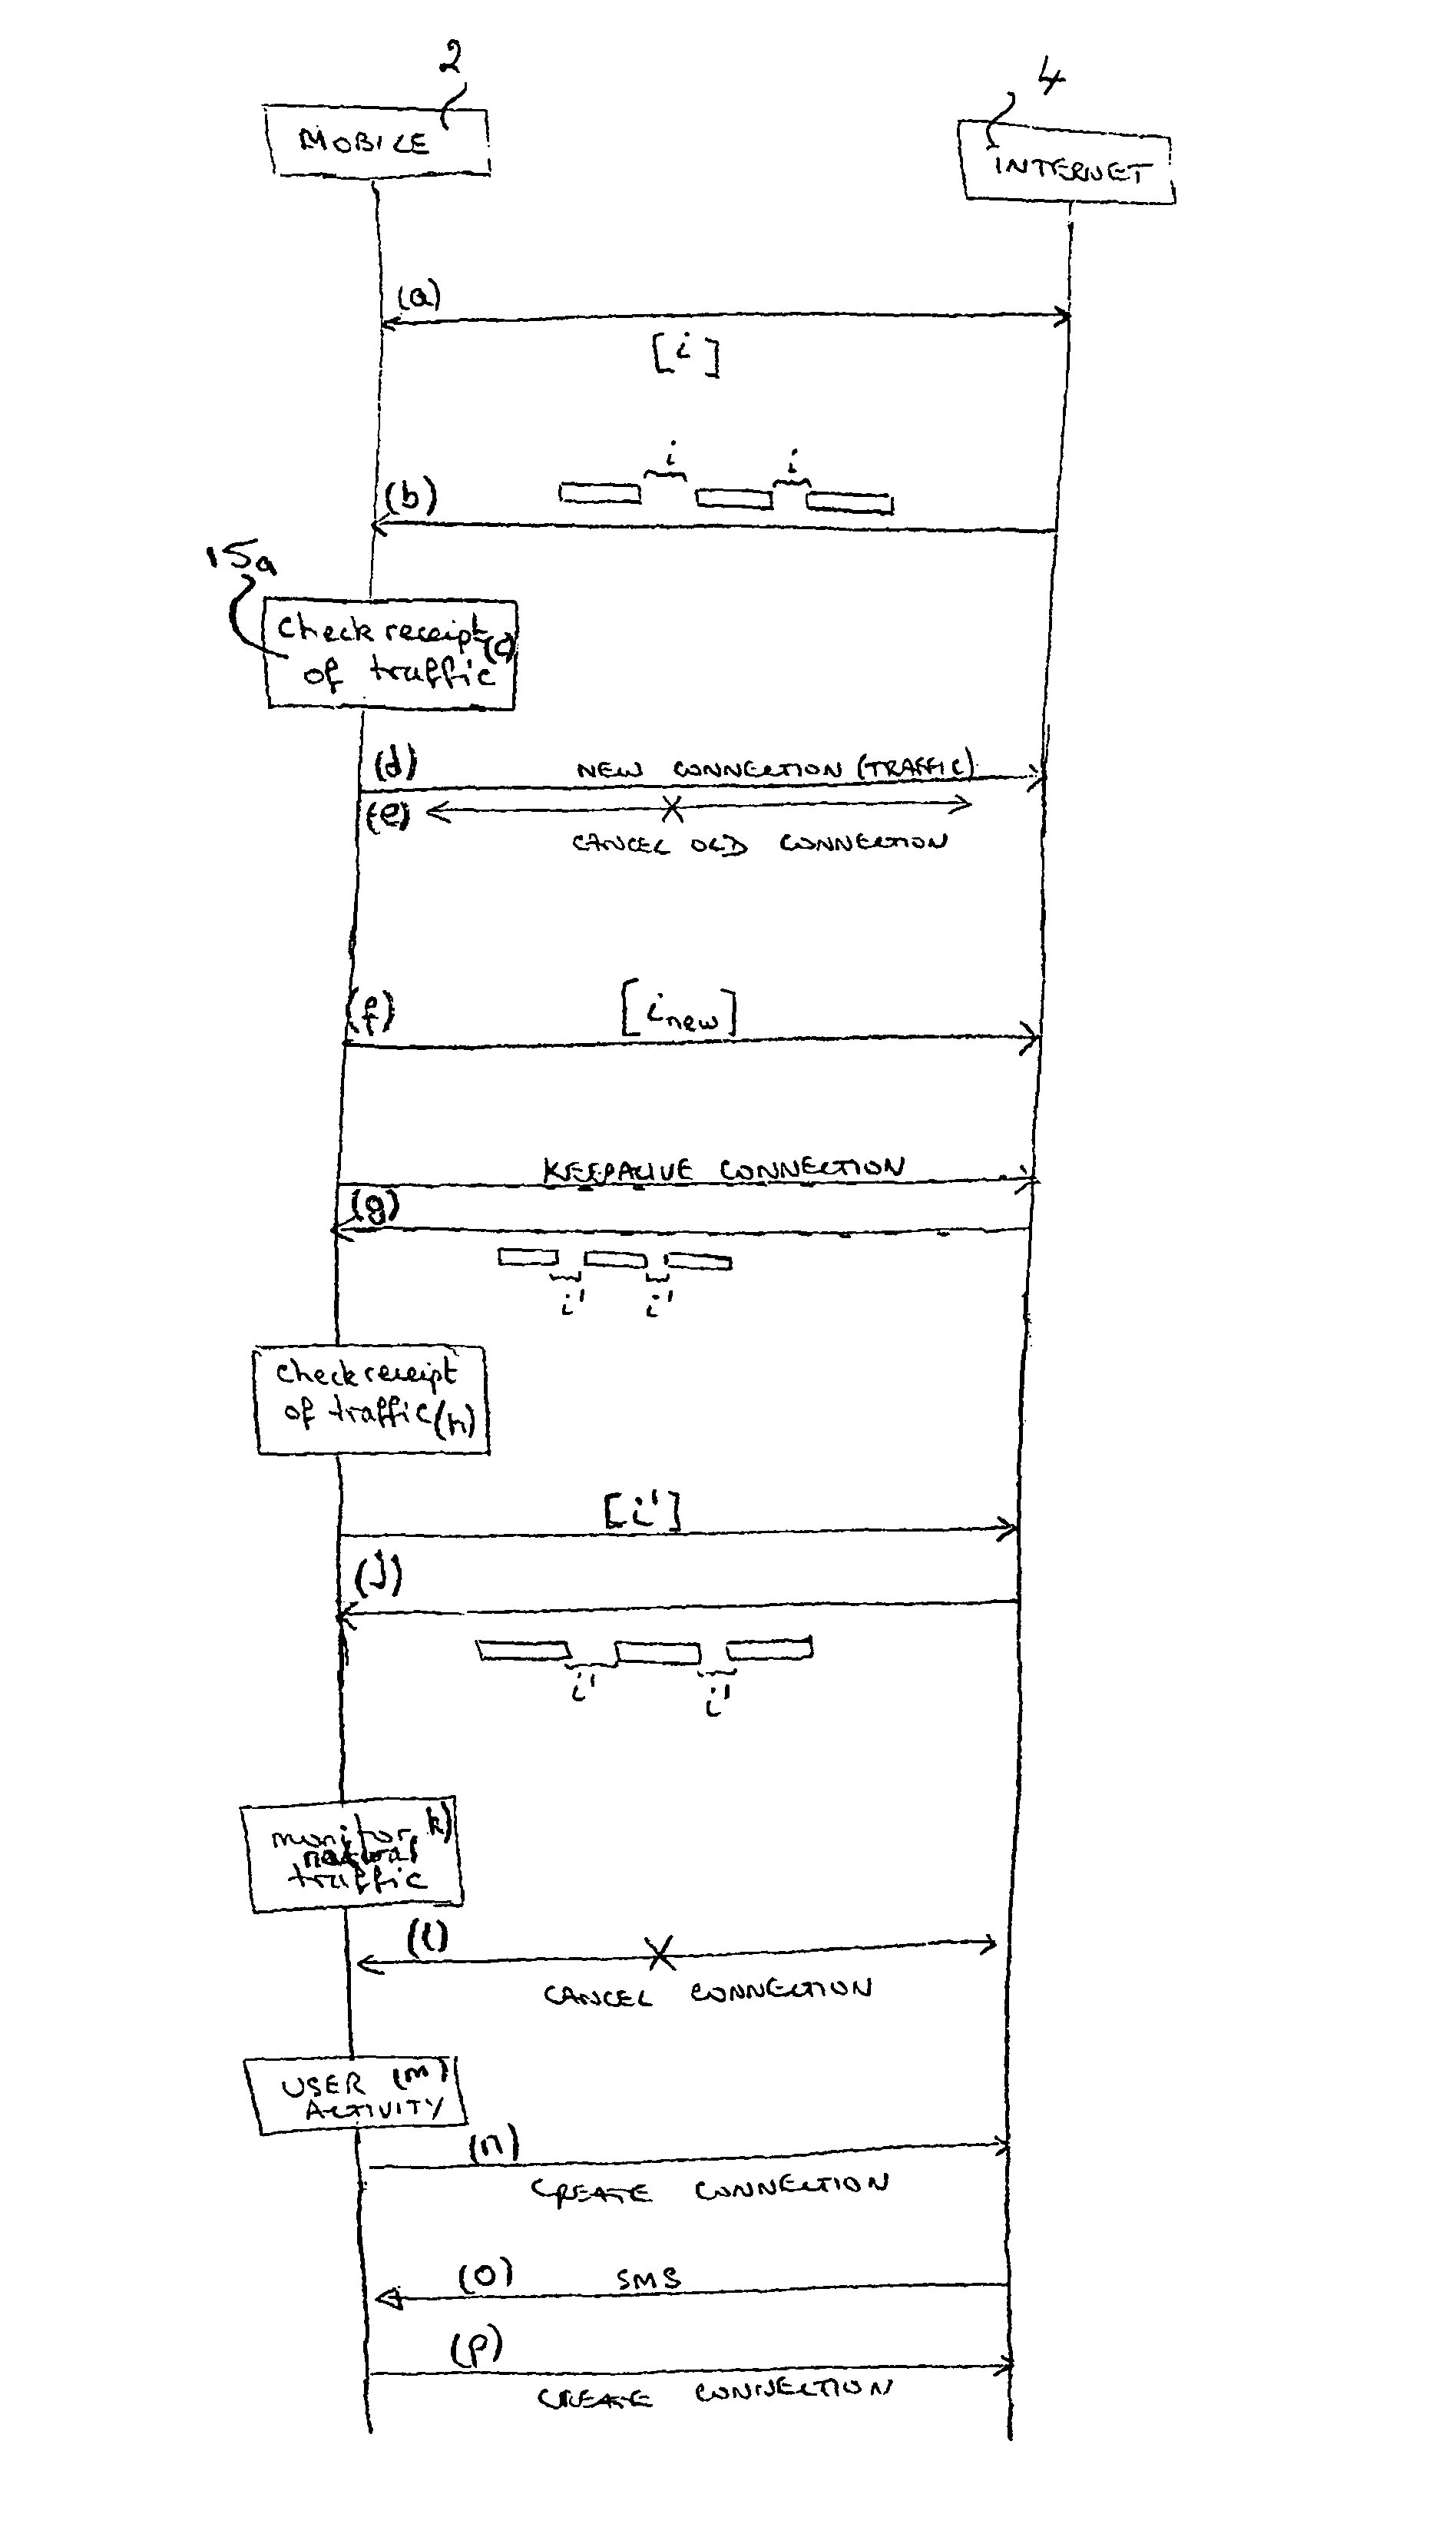 Managing connections in a wireless communications network